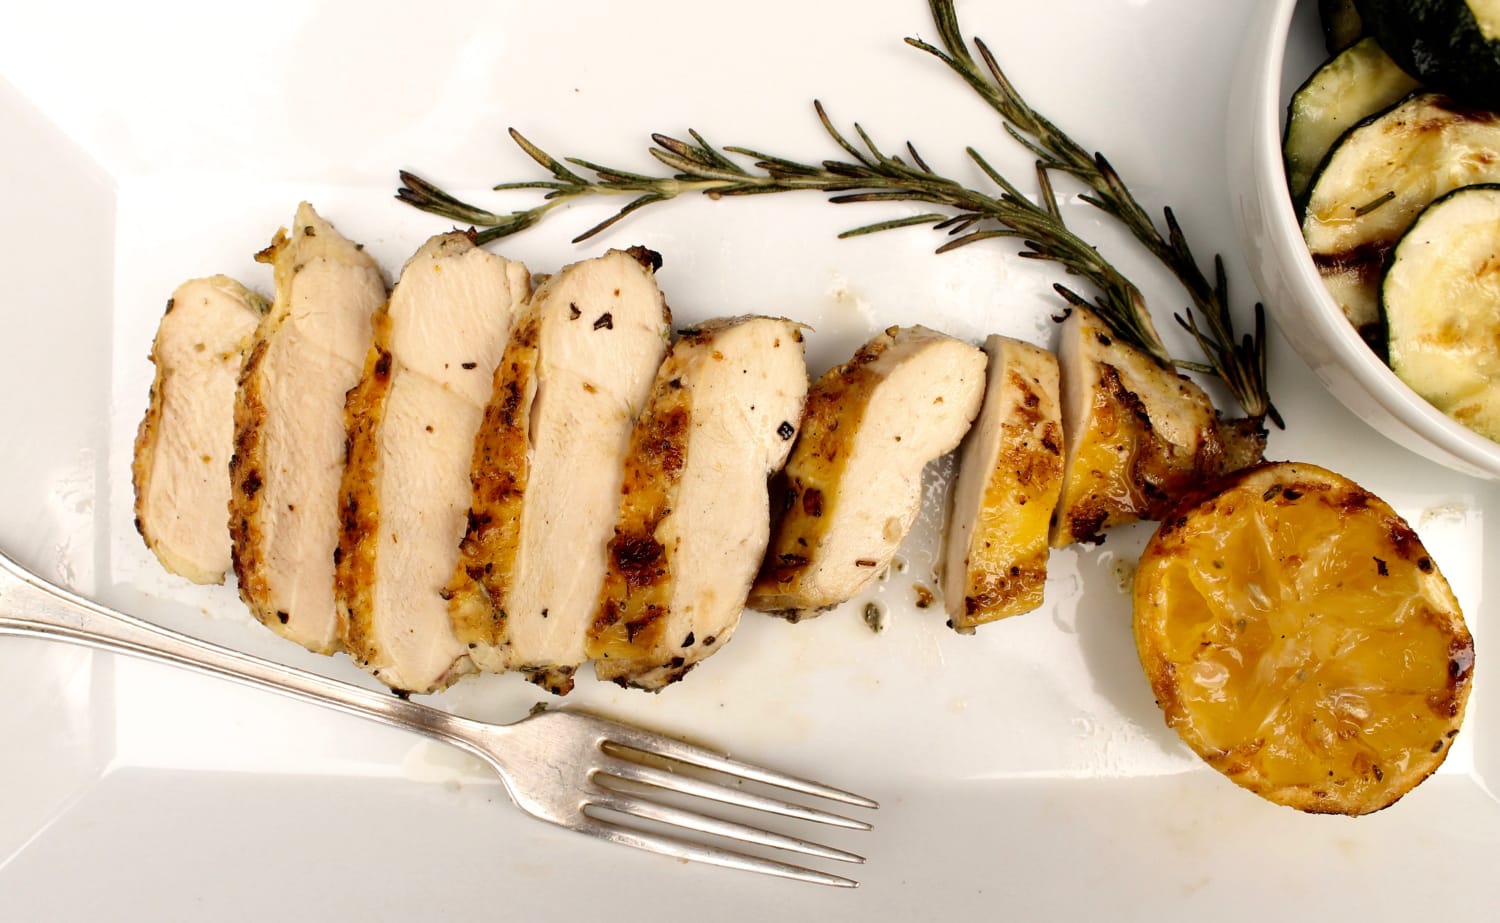 5-Ingredient Lemon-Rosemary Grilled Chicken Breasts - TODAY.com